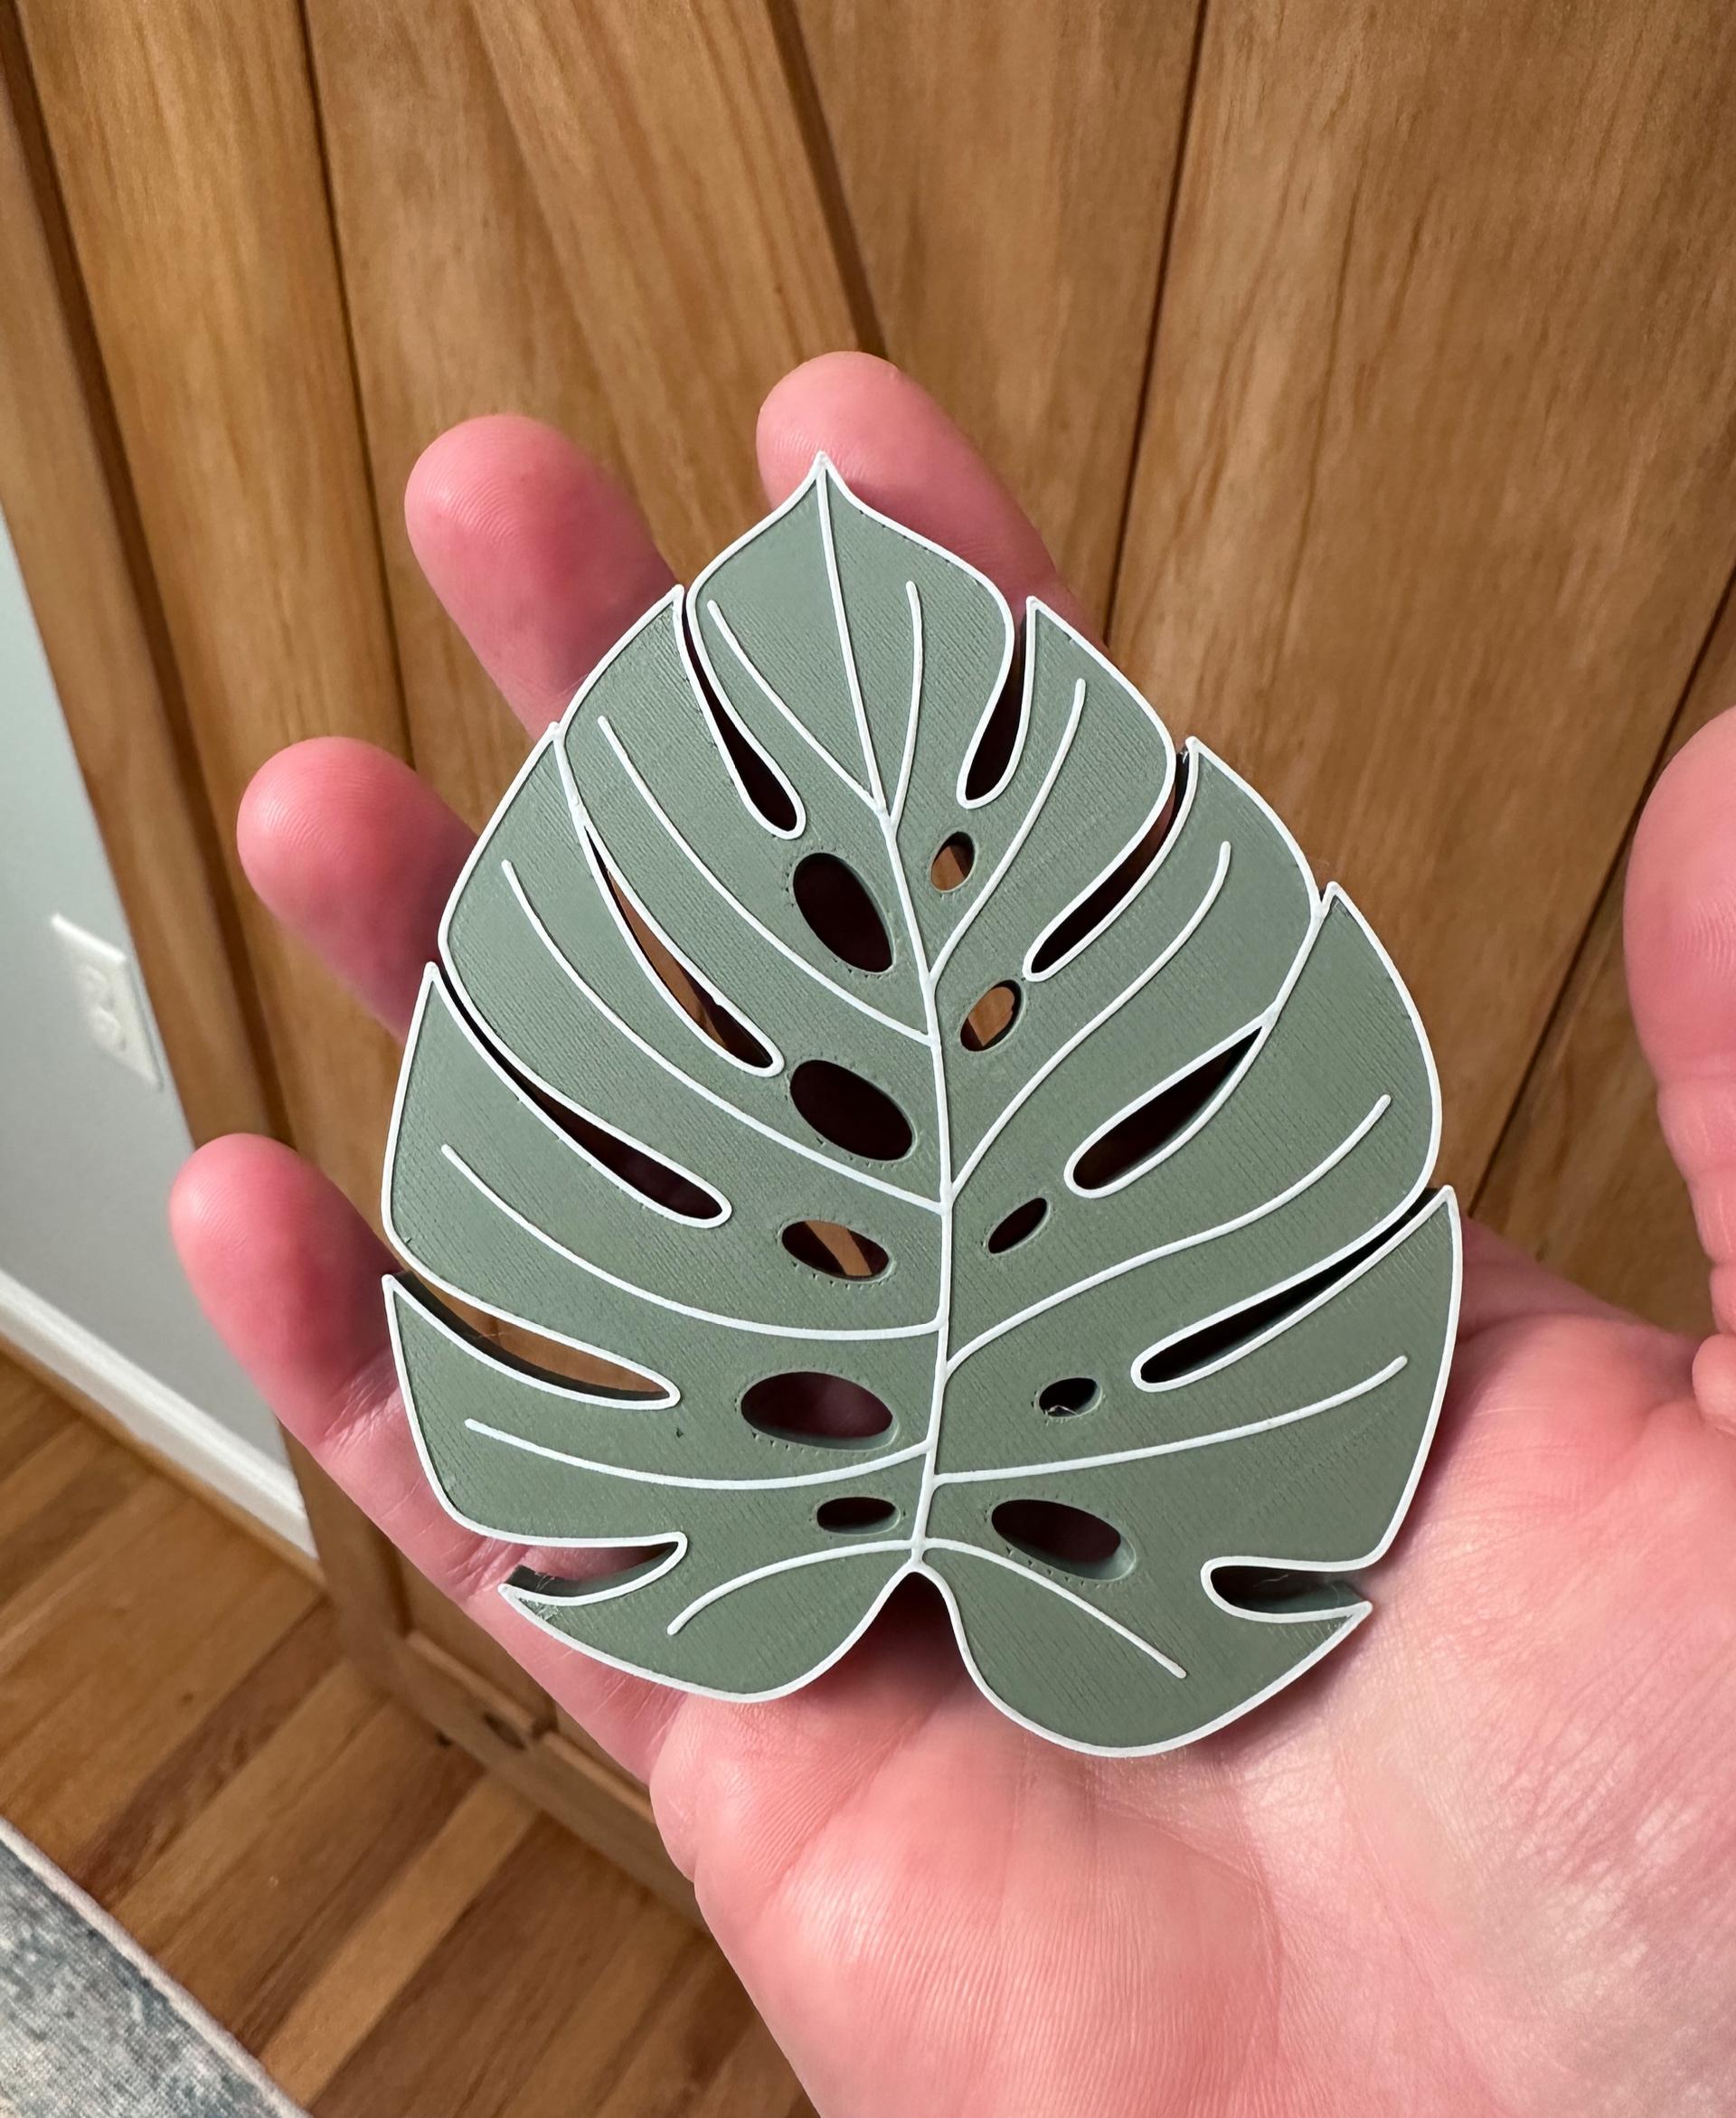 Monstera Leaf Magnet - Super fun to make these, especially with different filaments. - 3d model